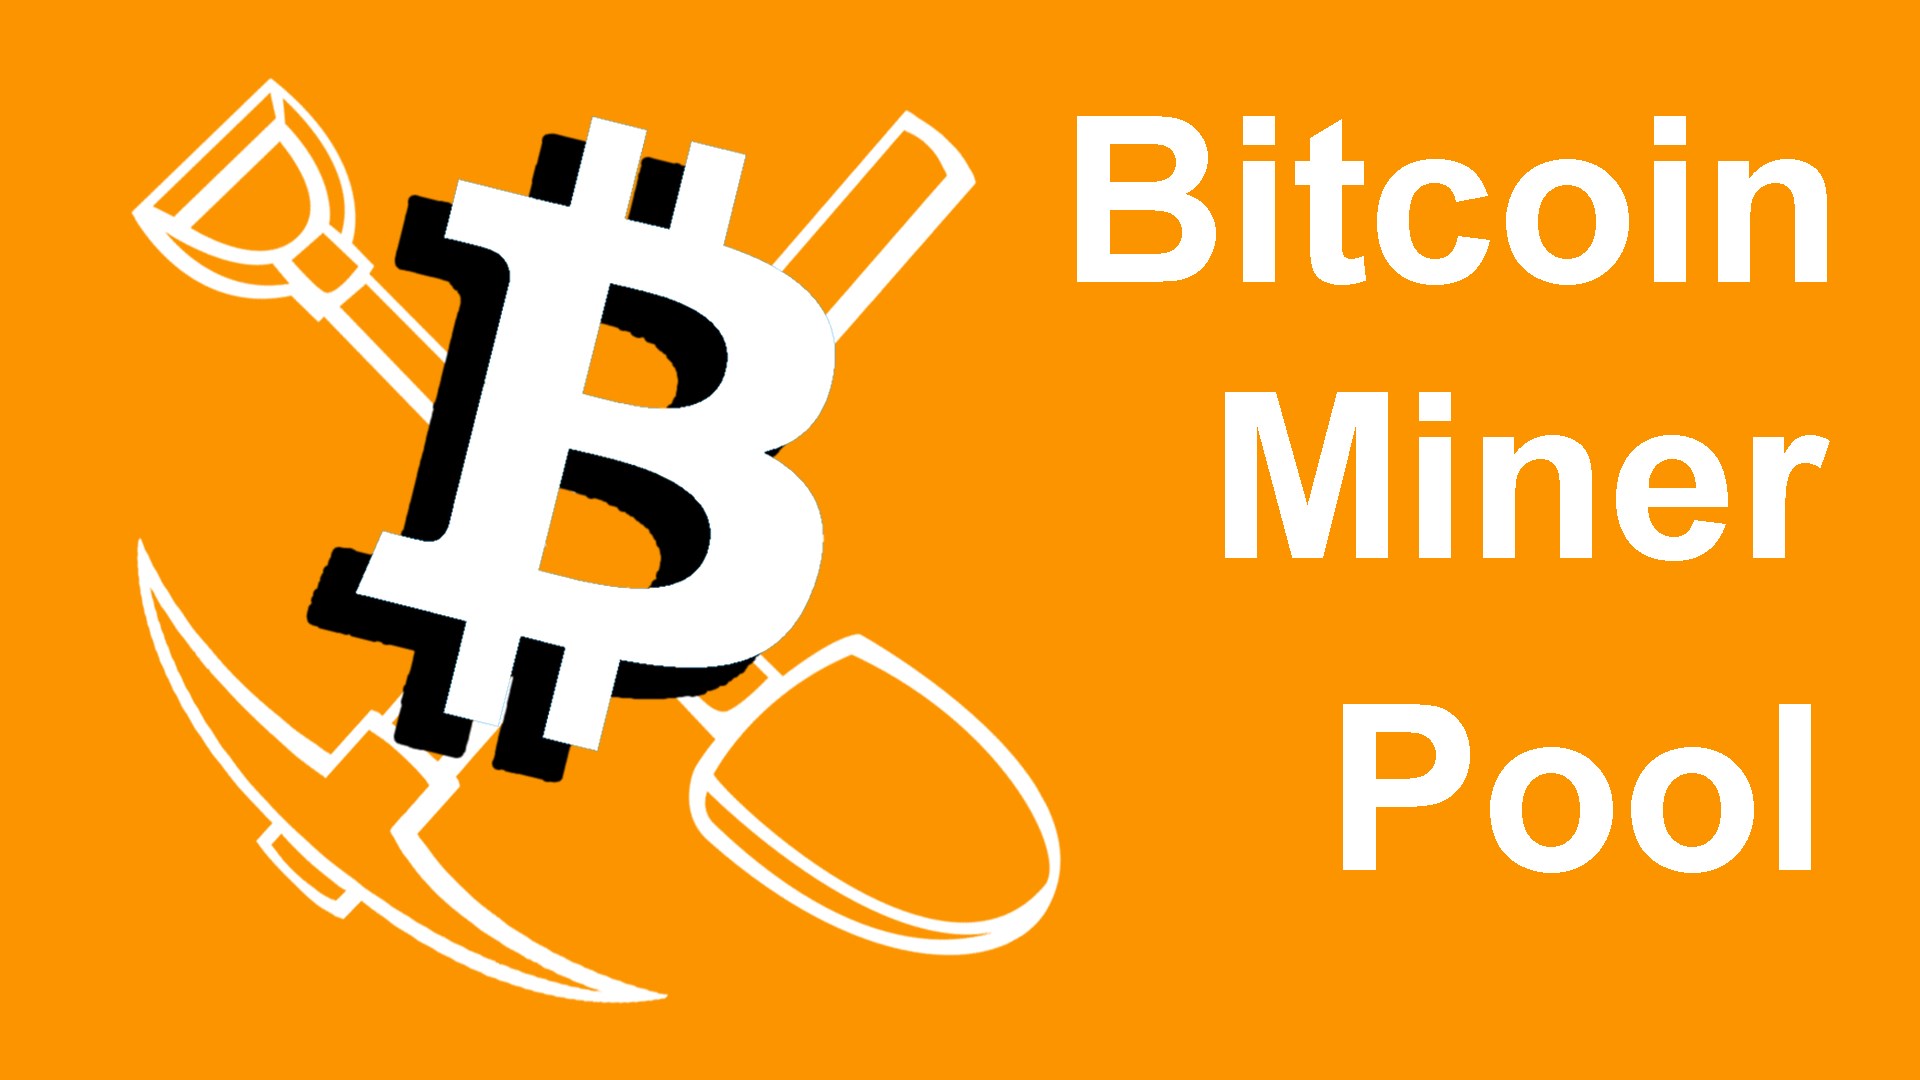 Crypto Miner App Android Download - Claim Bitcoin Mining Free Apk Free Download For Android - If your answer is yes, then download cryptotab browser pro apk for your android mobile phones.